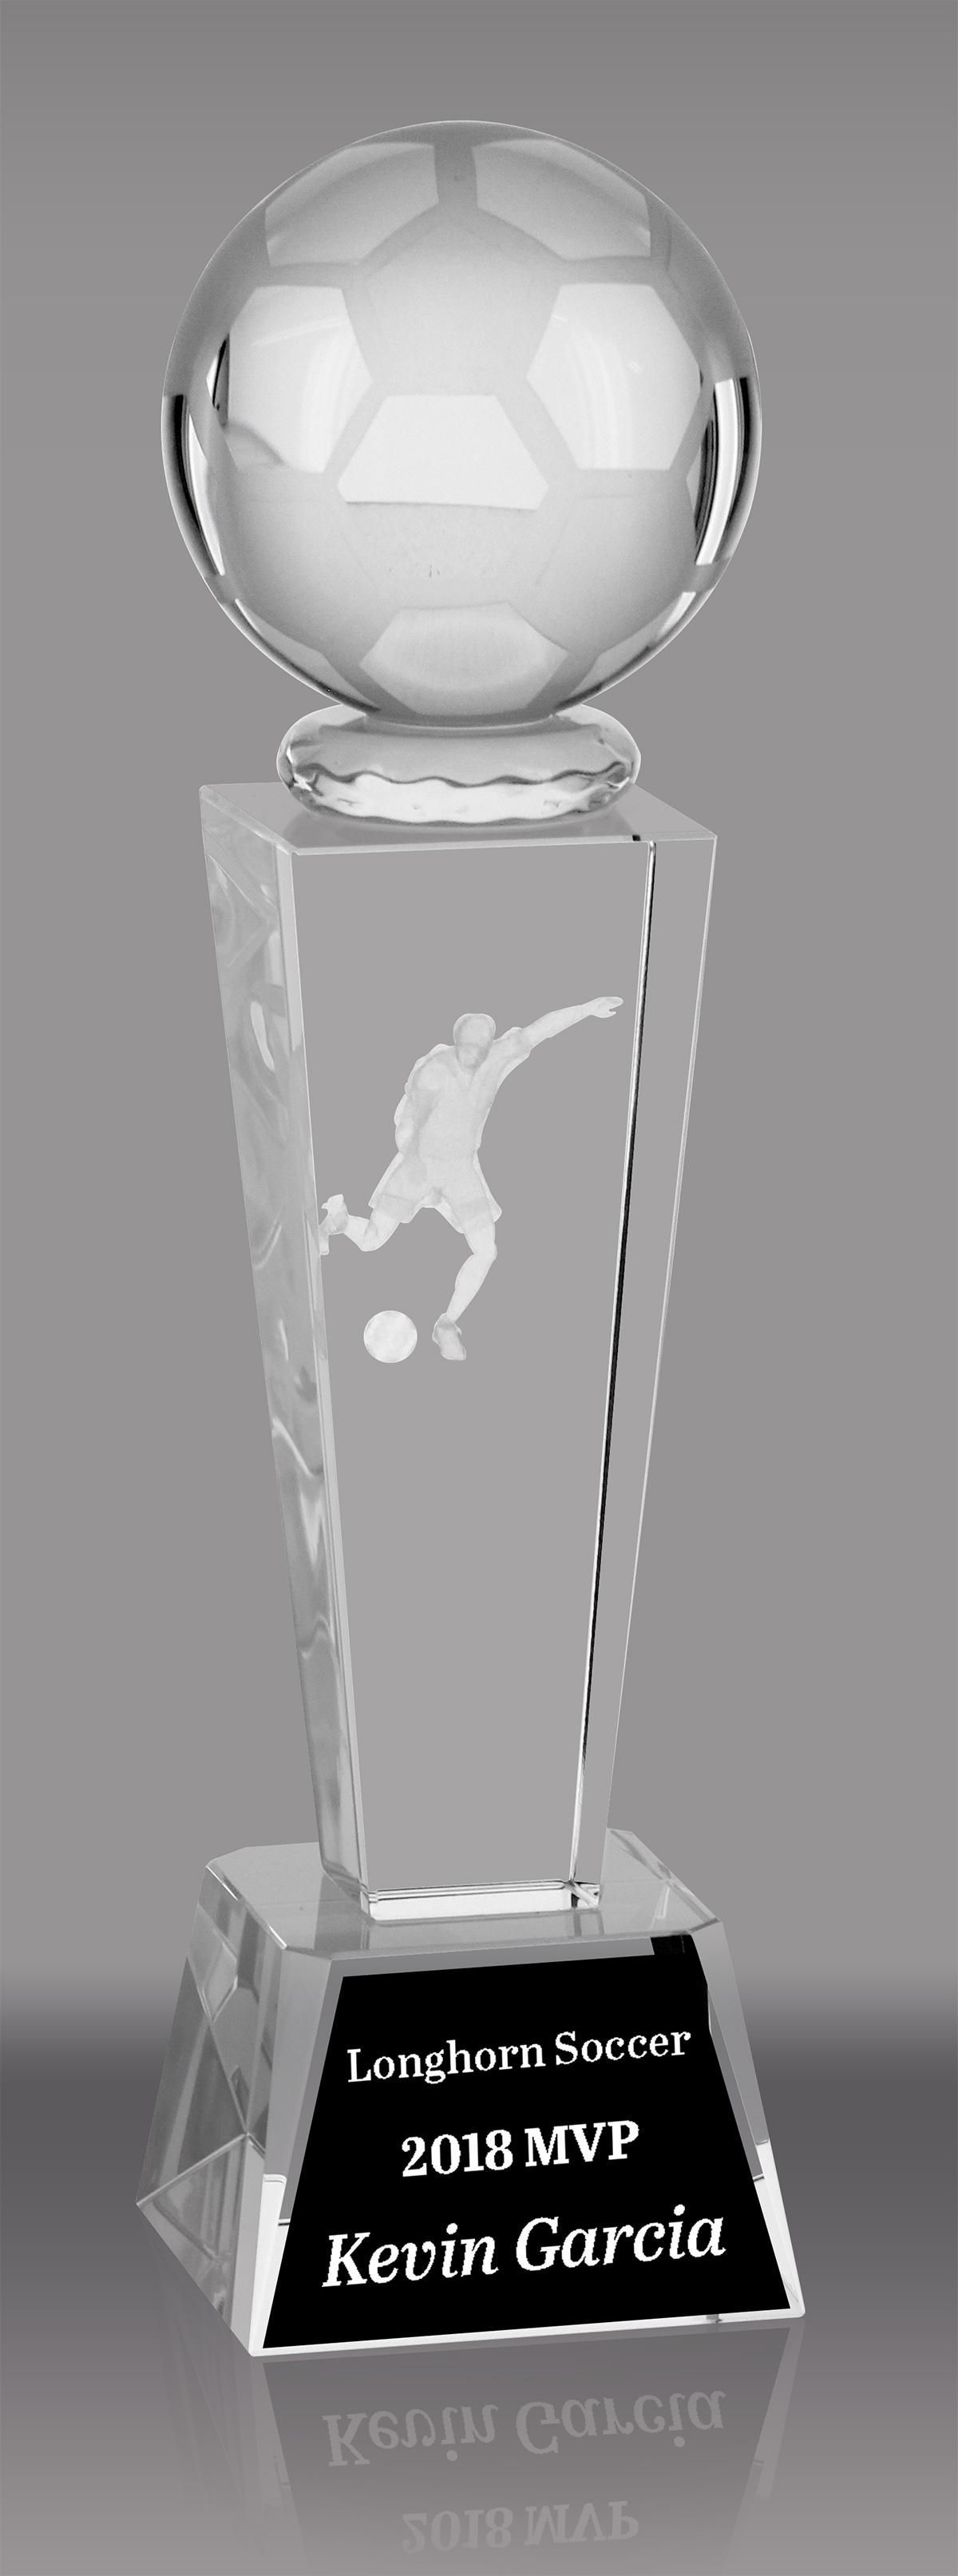 DEFENDER FOOTBALL TROPHY PLAYER CUP AWARD FREE ENGRAVING